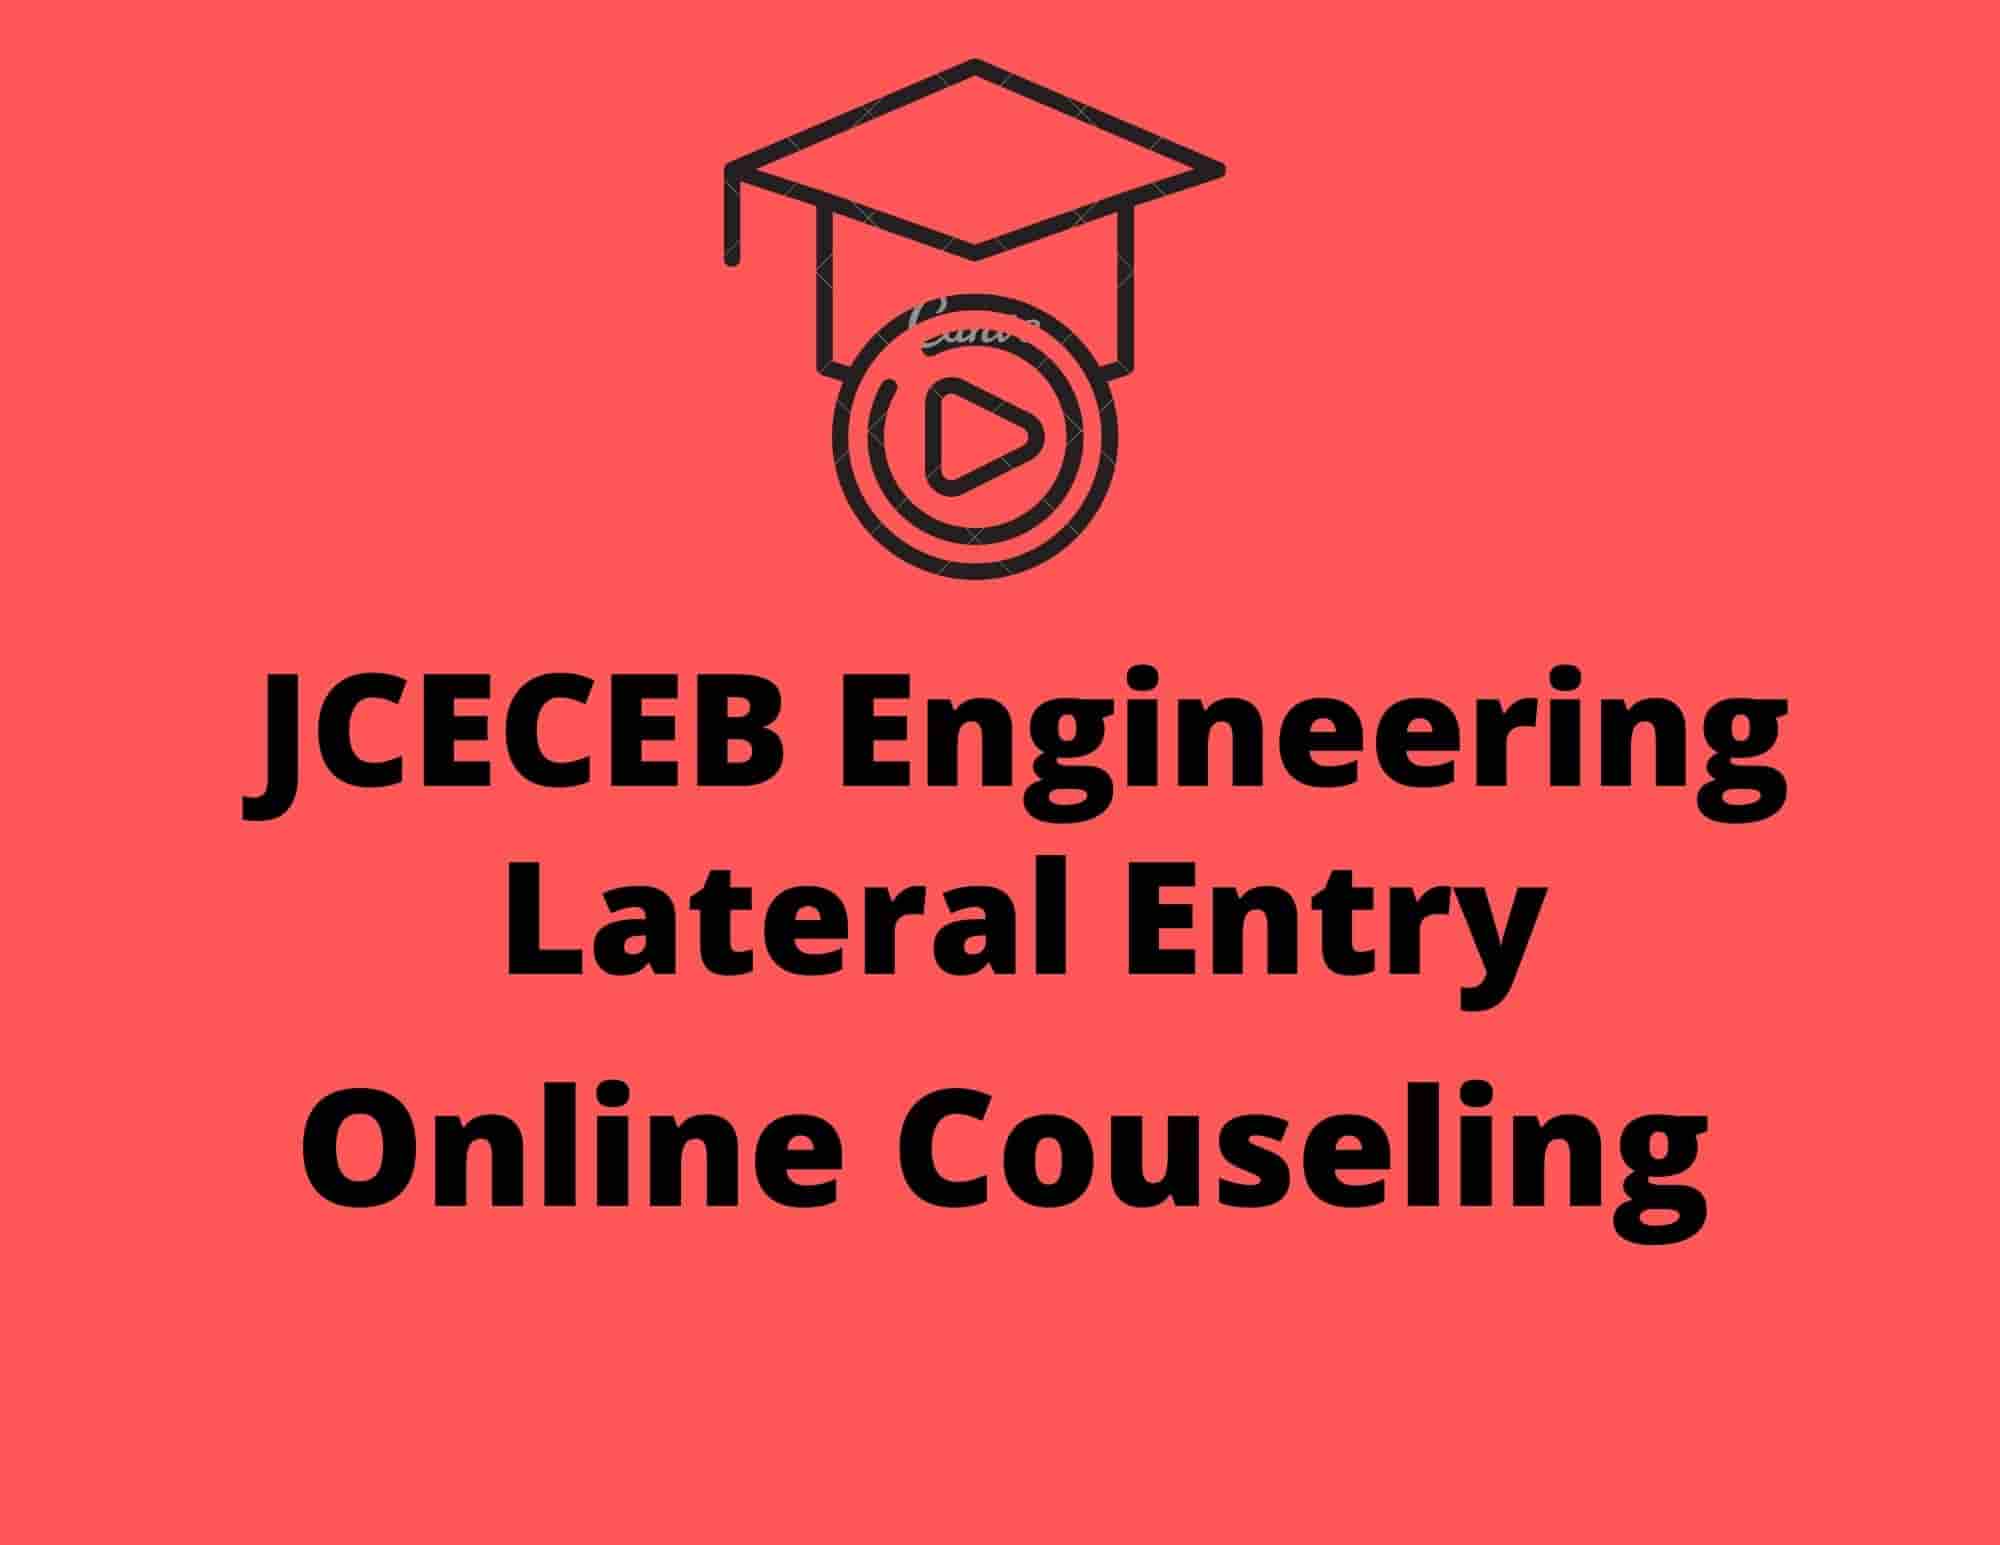 jceceb-engineering-lateral-entry-online-counseling